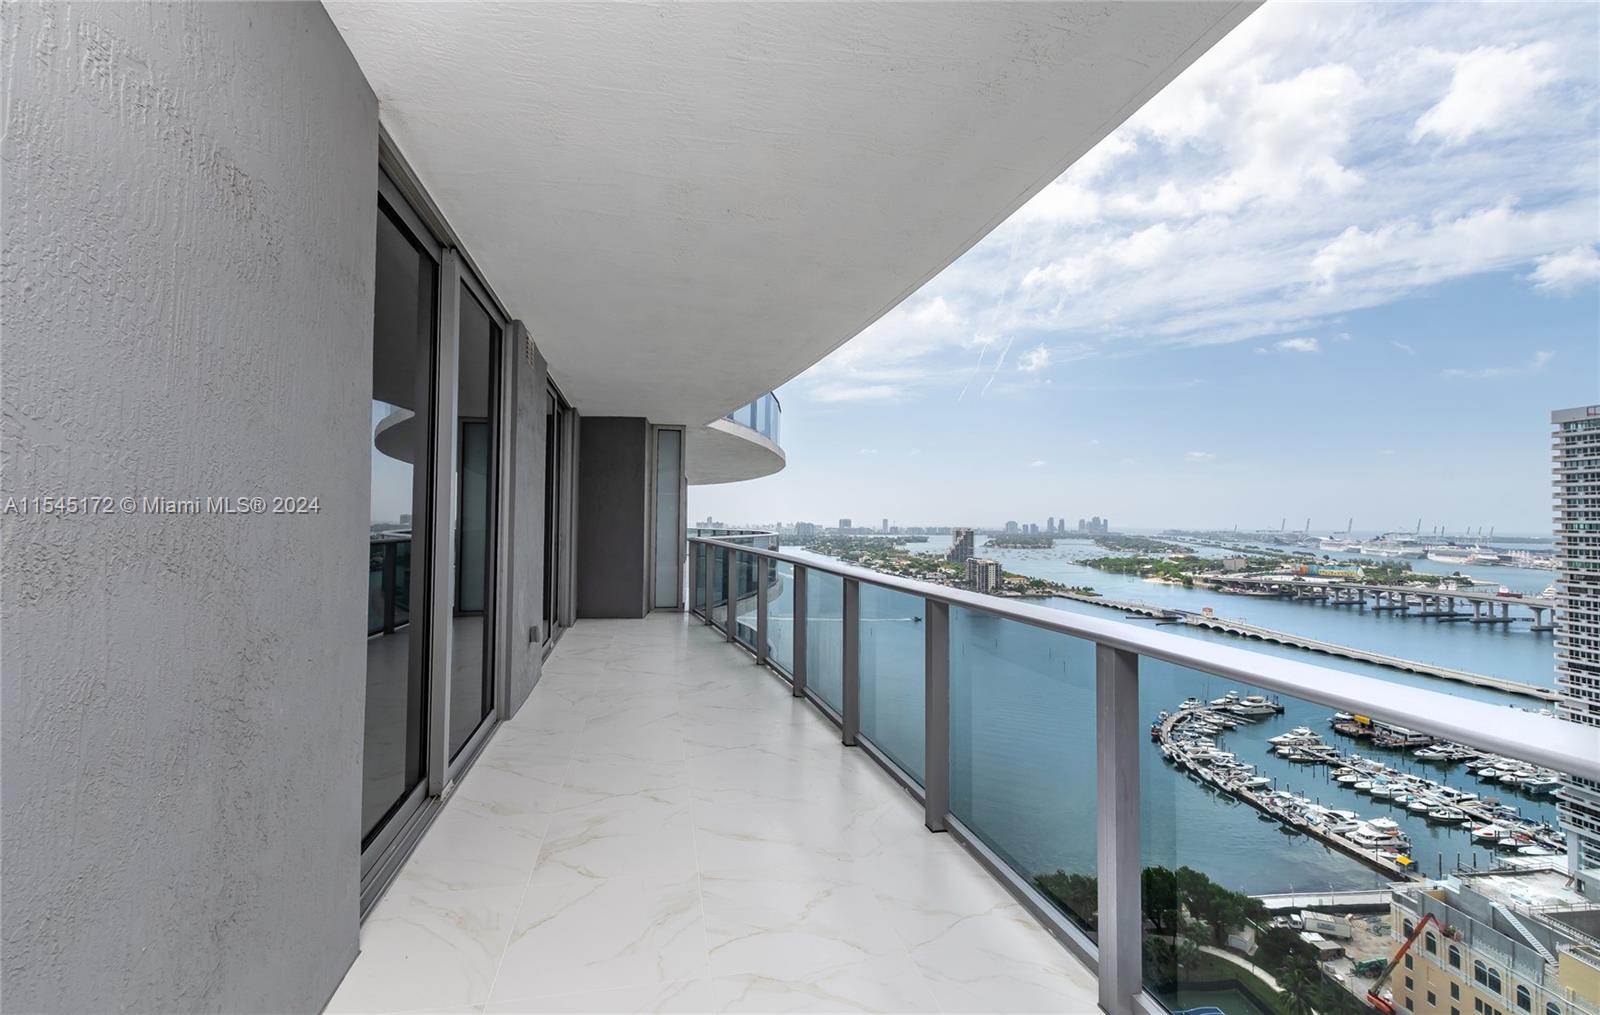 BRIGHT AND SUPER SPACIOUS 3 BED, 3 and 1/2 BATHS UNIT WITH BREATHTAKING VIEWS TO BISCAYNE BAY AT LUXURIOUS AND SPECTACULAR ARIA ON THE BAY. PRIVATE ELEVATOR TO FOYER, FLOOR TO CEILING WINDOWS, BEAUTIFUL AND ELEGANT CALACATTA WHITE POLISHED TILE FLOORING, EUROPEAN CABINETRY KITCHEN WITH BOSCH APPLIANCES. GRANITE COUNTER-TOPS. AMENITIES INCLUDE 2 CURVED SUNRISE AND SUNSET POOLS, JACUZZI OVERLOOKING BAY, INDOOR/OUTDOOR SOCIAL ROOM, EXPANSIVE SUN DECK, BUSINESS CENTER, STATE-OF-THE-ART GYM AND YOGA STUDIO, OUTDOOR FIRE PIT, BBQ, GREAT ROOM, , GAME ROOM AND LIBRARY, TEEN LOUNGE AND KIDS PLAYROOM. CLOSE TO DOWNTOWN, MIAMI BEACH, FINANCIAL DISTRICT BRICKELL AND MUCH MORE! QUICK ACCESS TO MAJOR HIGHWAYS. TENANT OCCUPIED/ 24-48 HRS NOTICE REQUIRED.